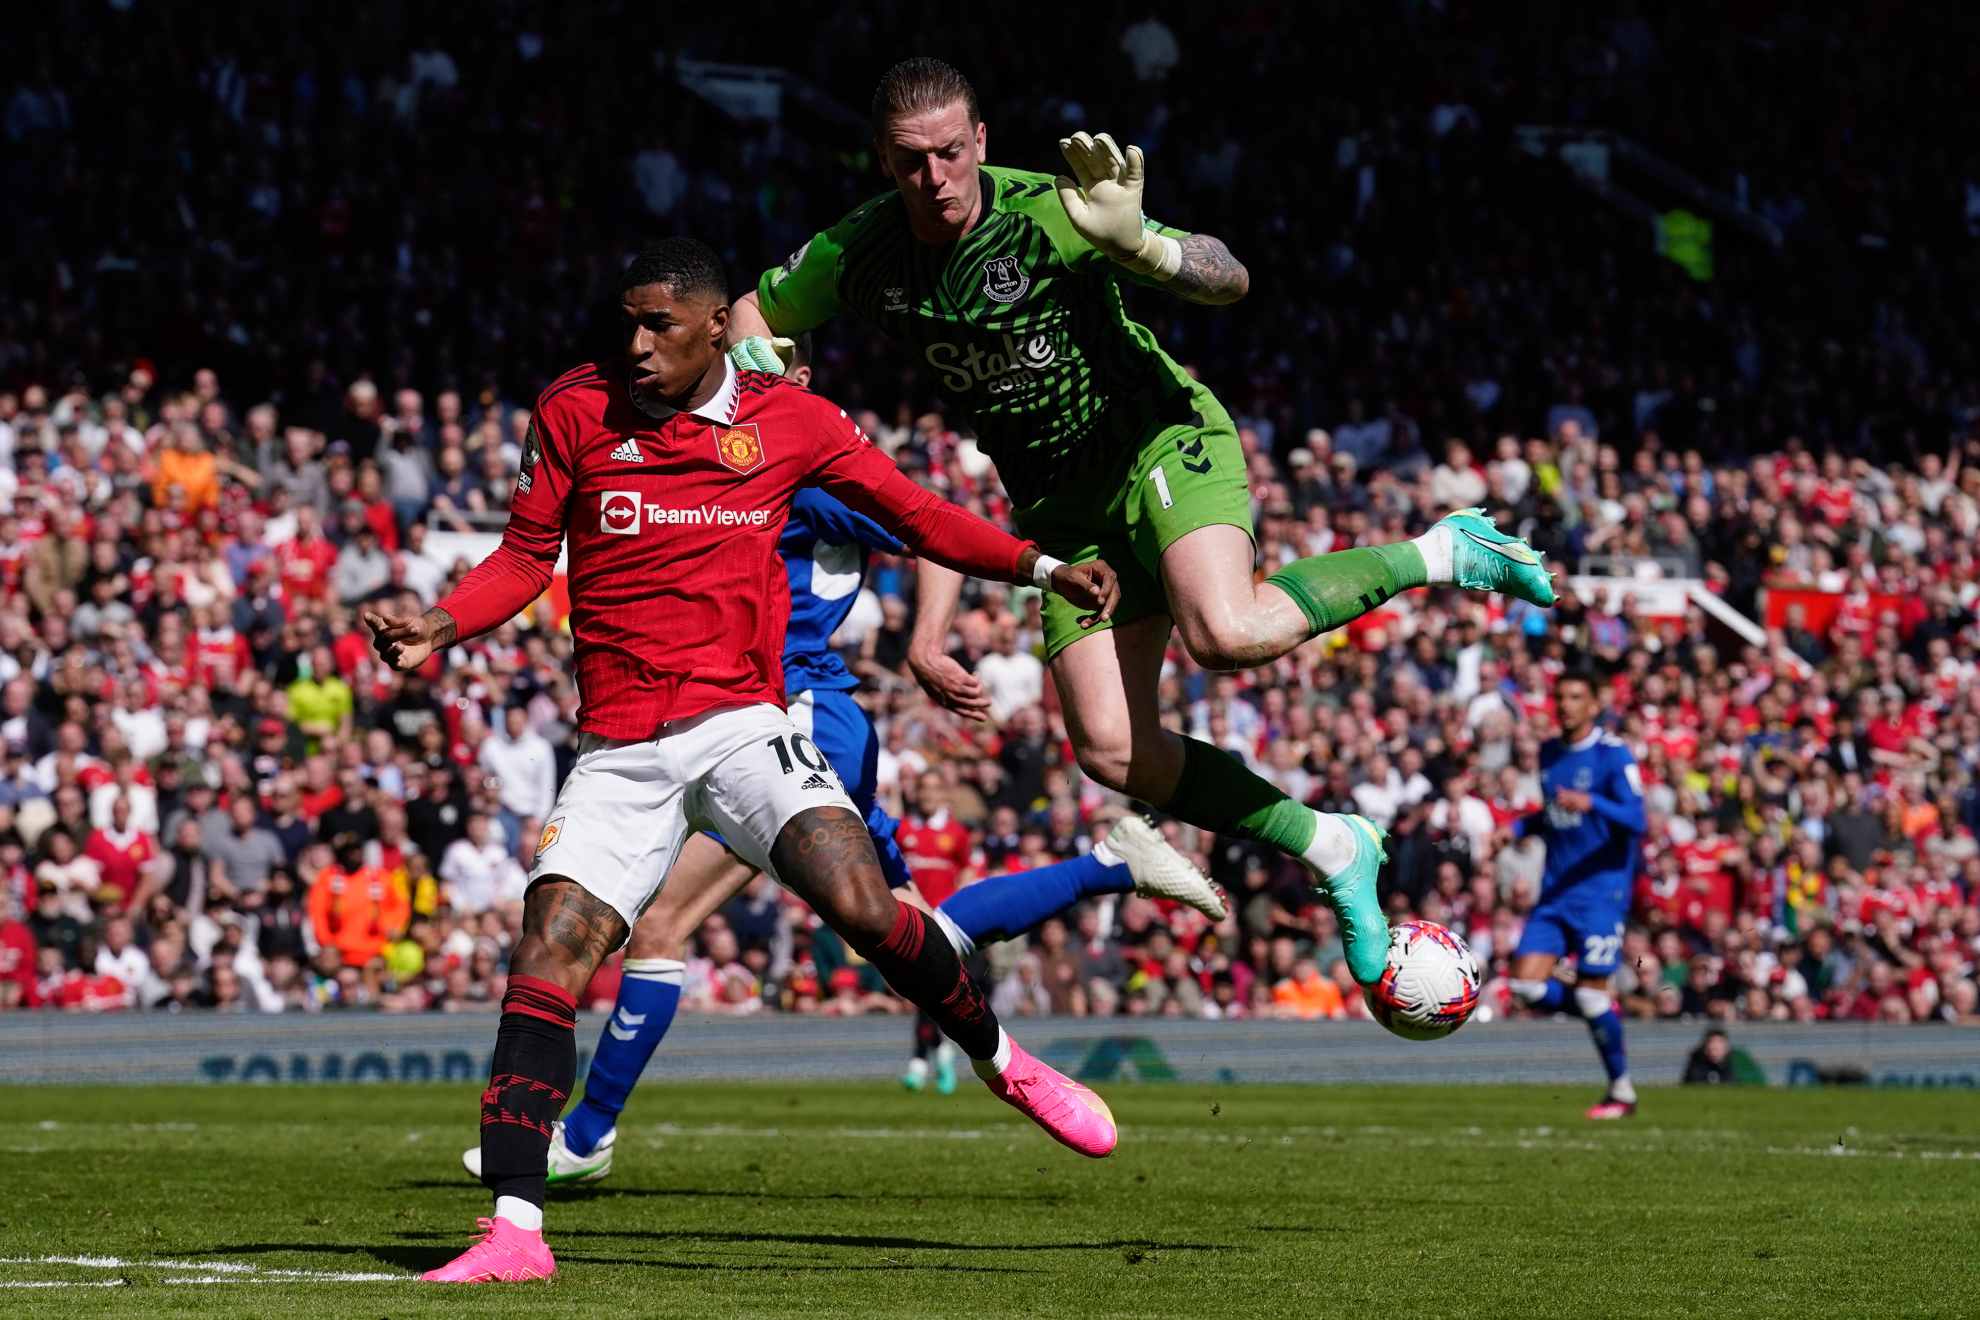 Everton's goalkeeper Jordan Pickford saves on an attempt to score by Manchester United's Marcus Rashford .